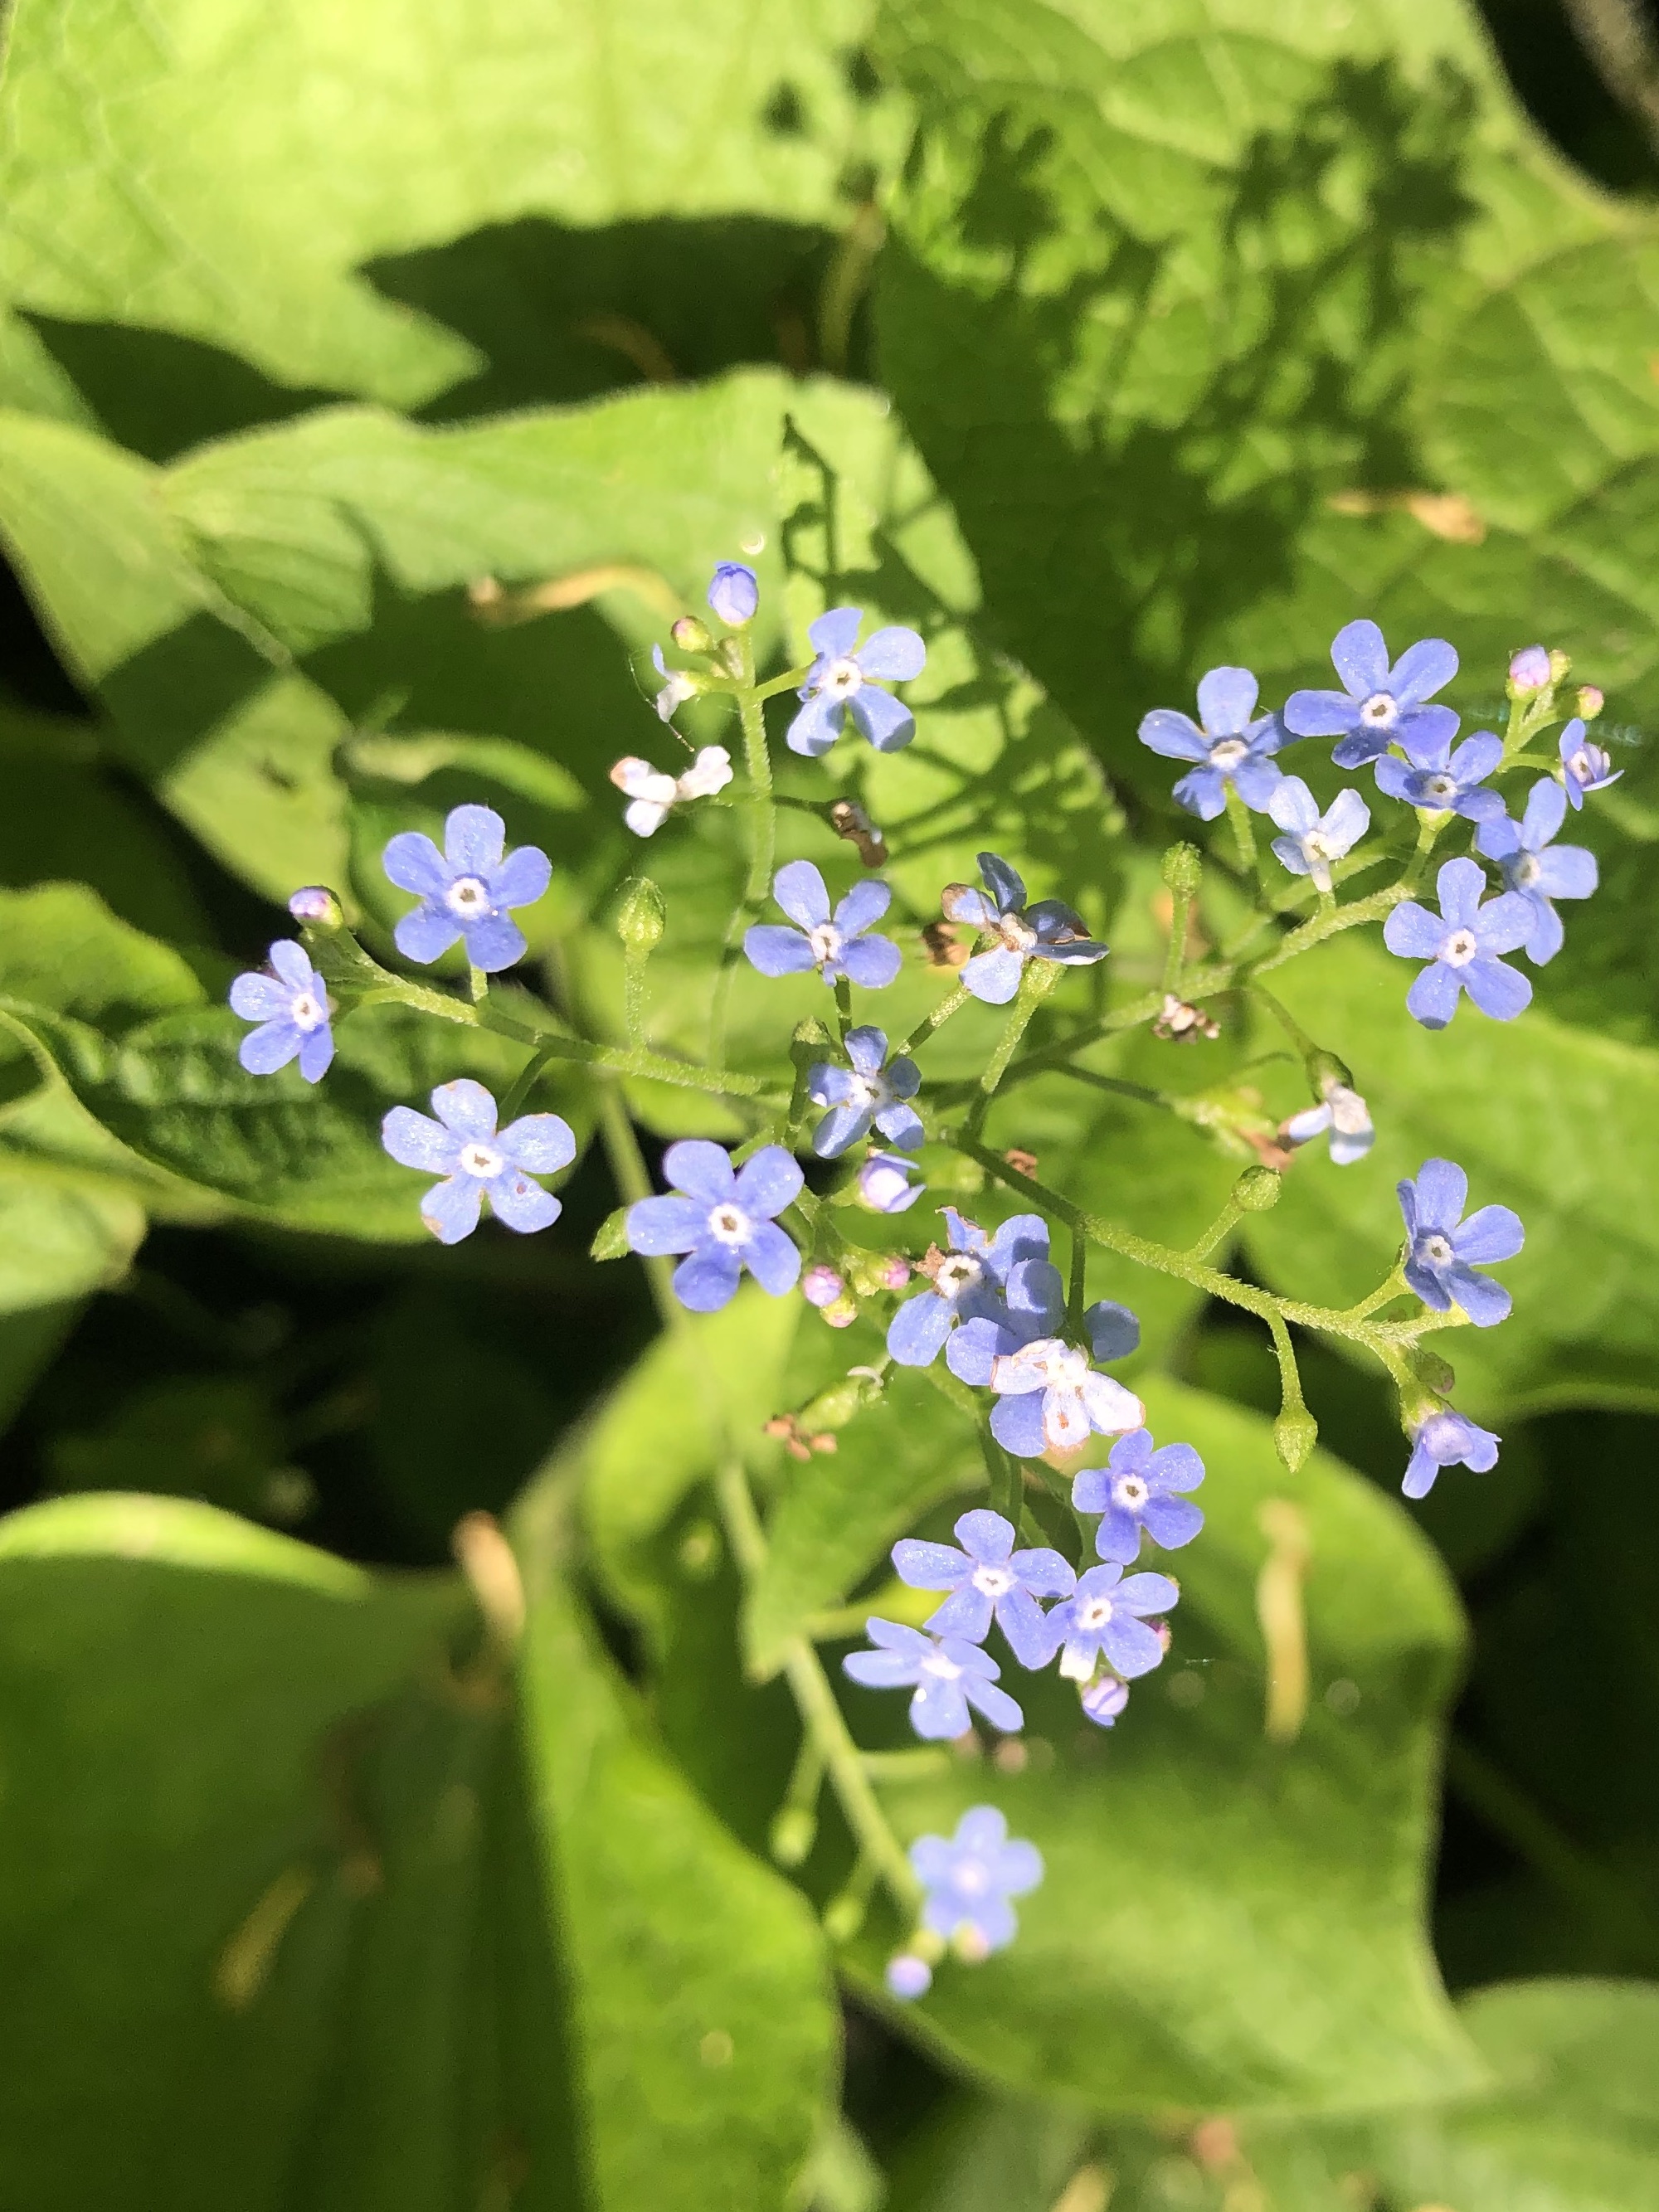 False Forget-Me-Not in the Thoreau Rain Garden in Madison, Wisconsin on May 122, 2022